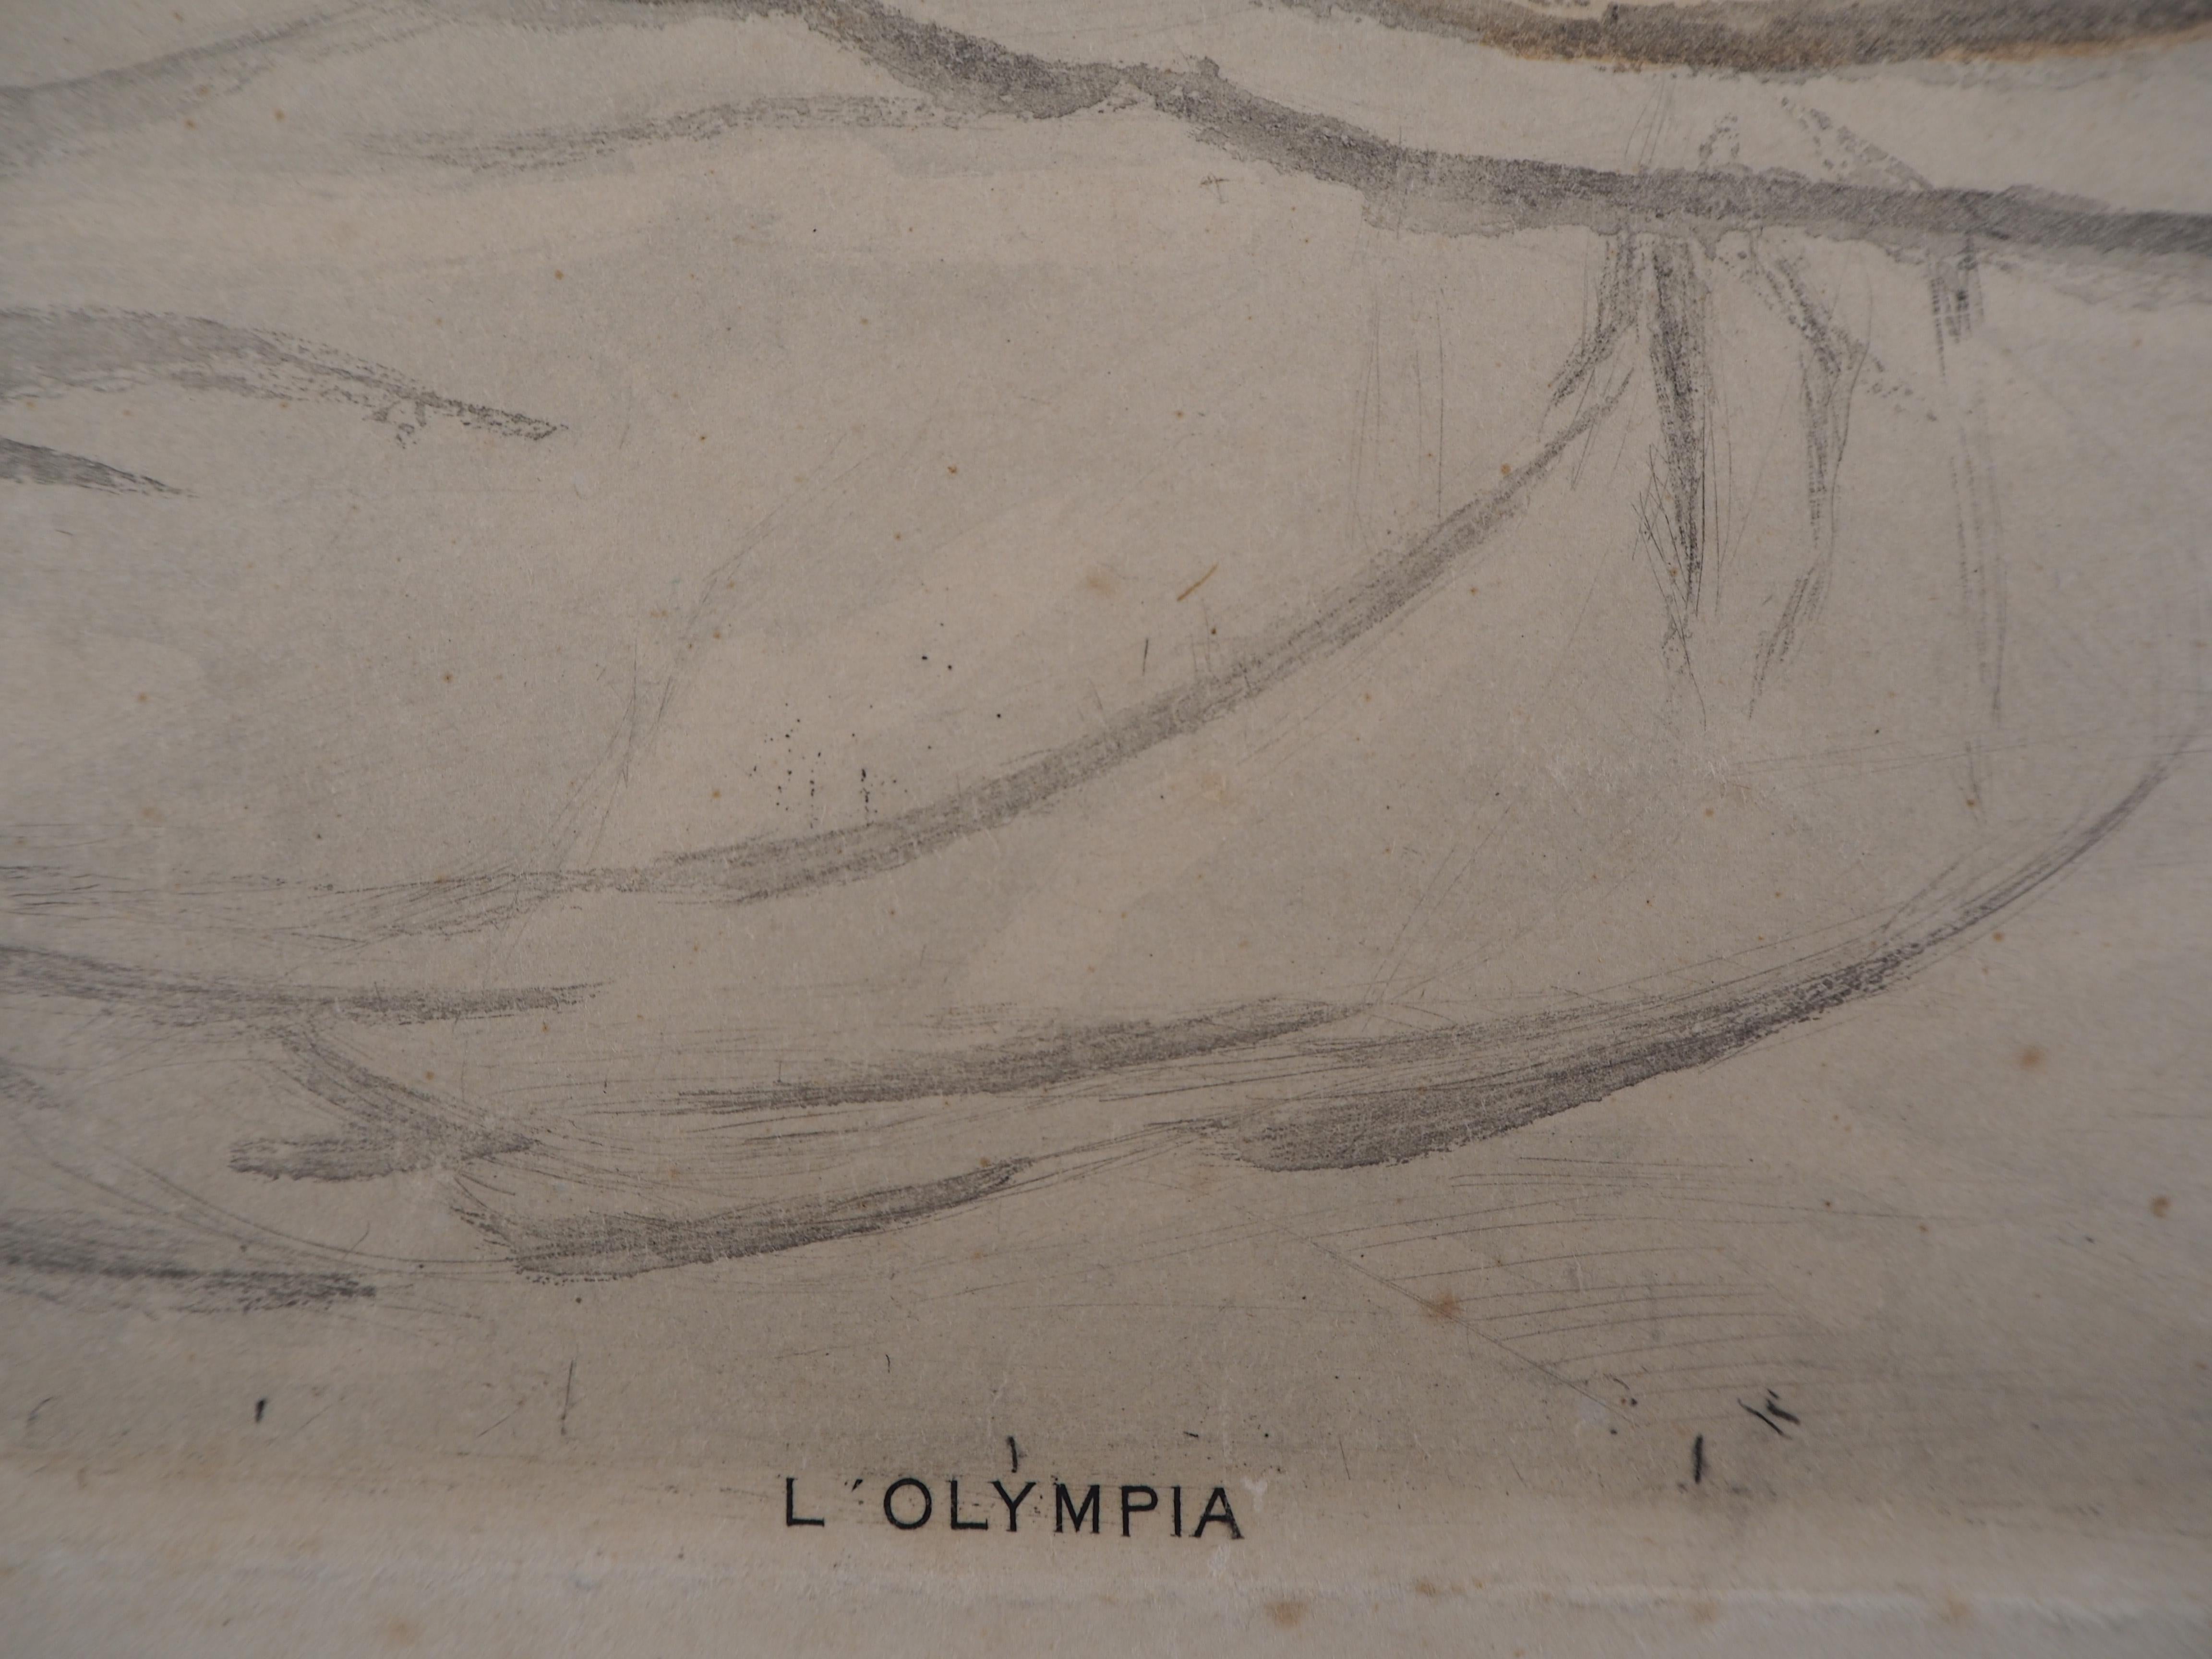 Olympia - Etching and aquatint engraved by J. Villon 5